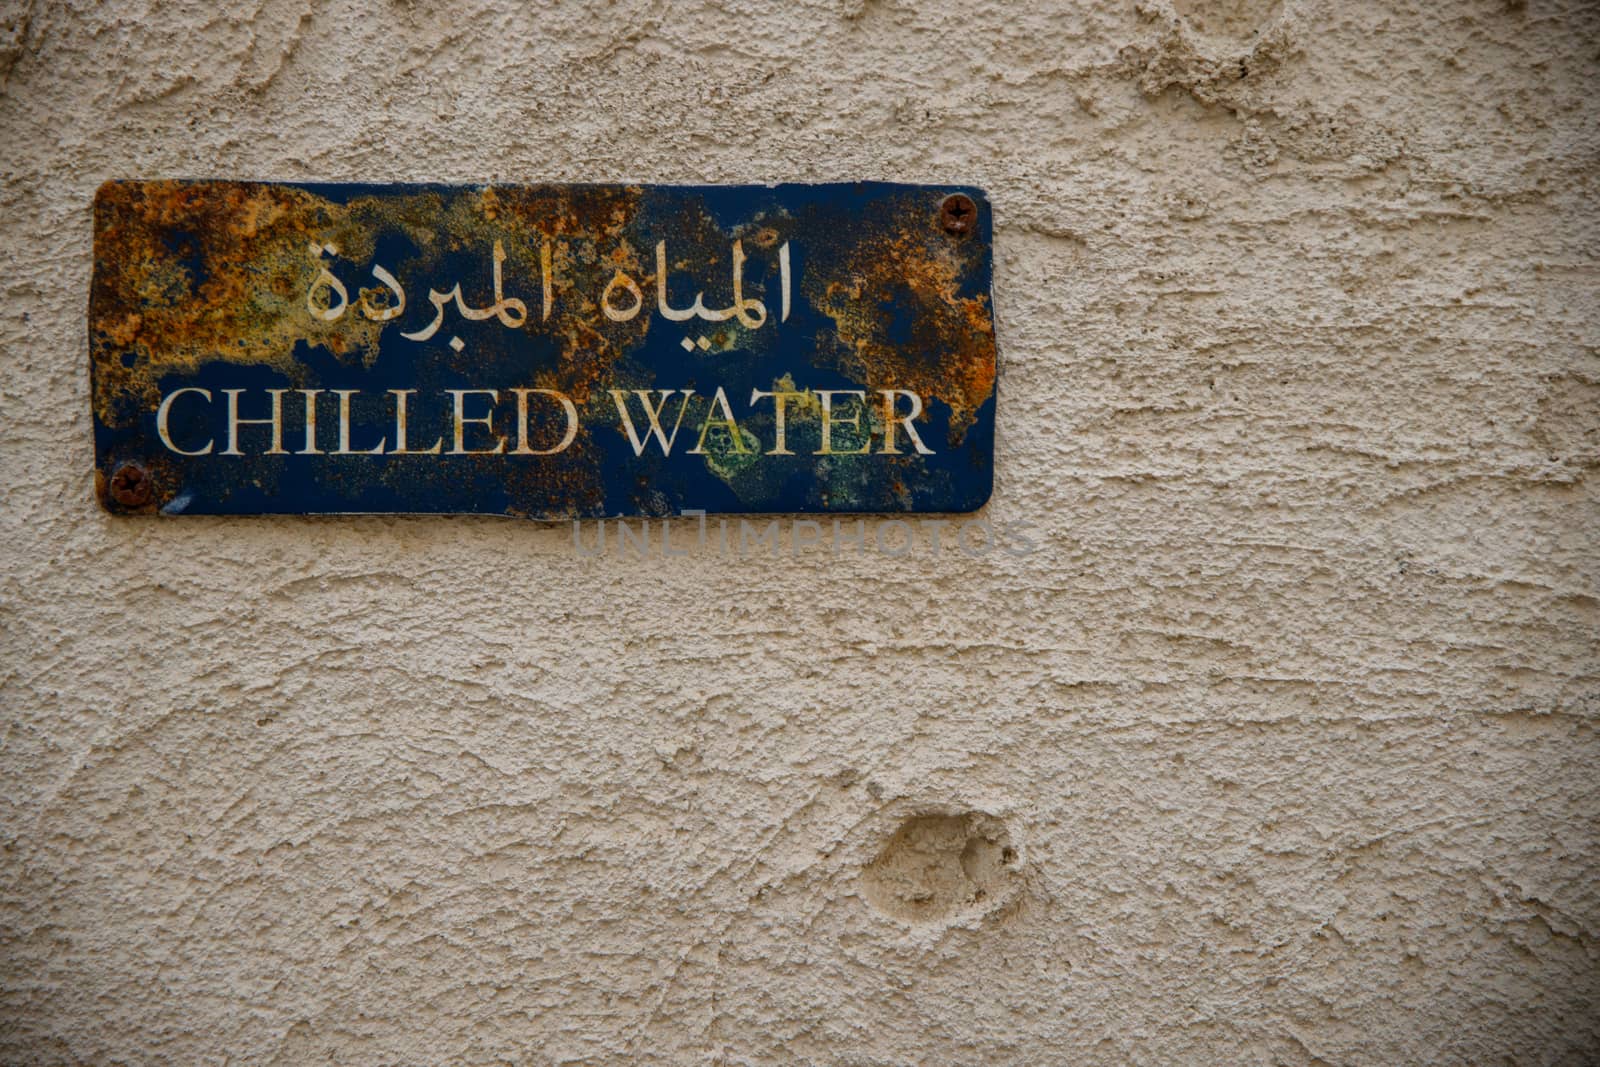 Old chilled water sign with rust on it. Arabic writing can read "Chilled Water" on a rusting blue sign on a traditional arabic house.